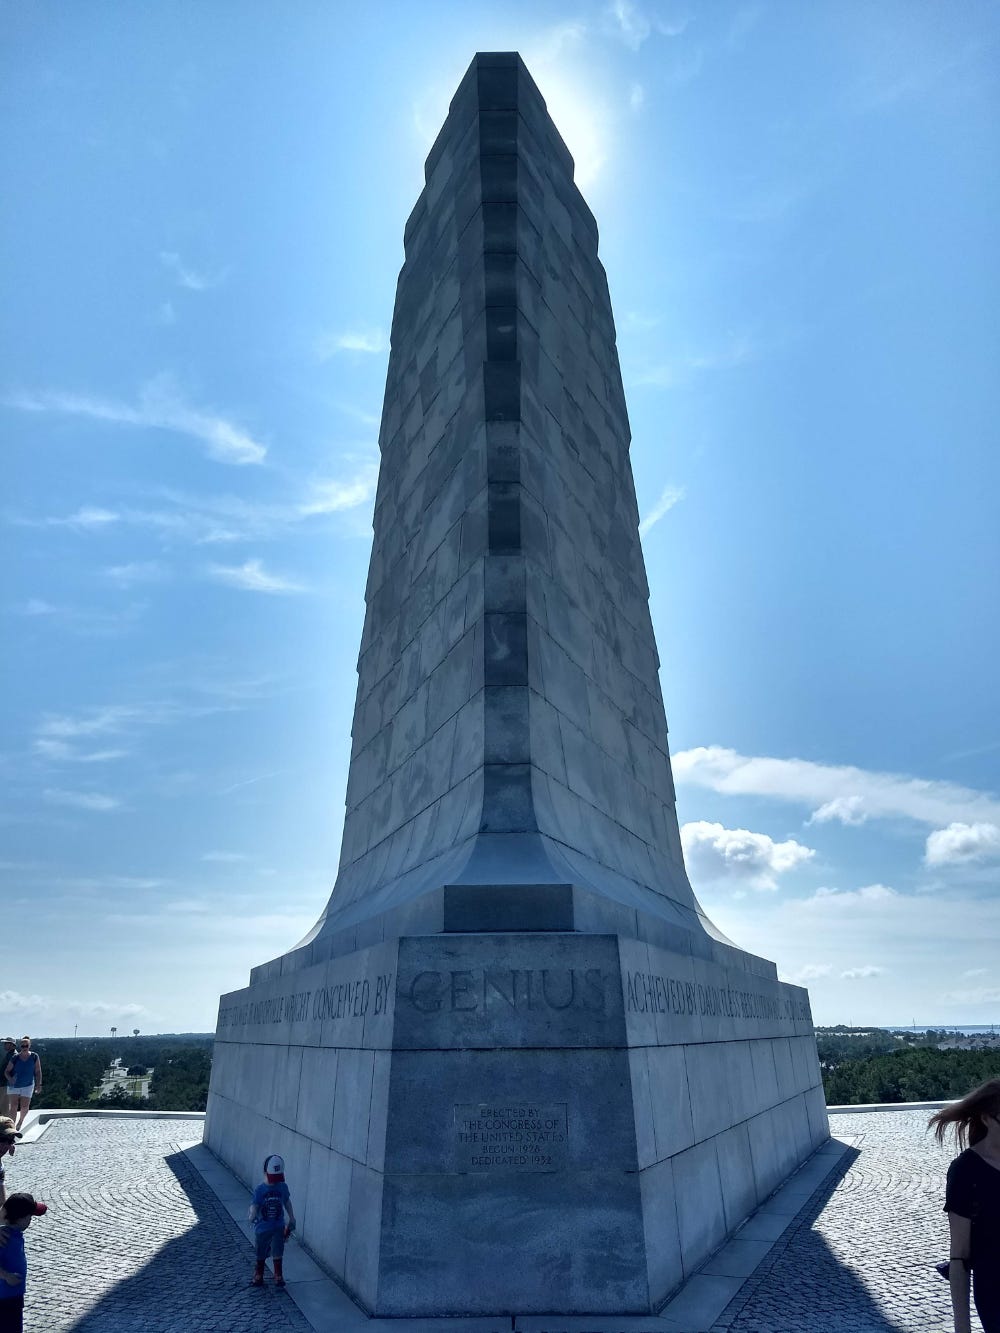 A contrasty photography of the Wright Brothers Memorial, with the sun behind it. The word "genius" is prominent on the front of the very tall, wedge-shaped sculpture.